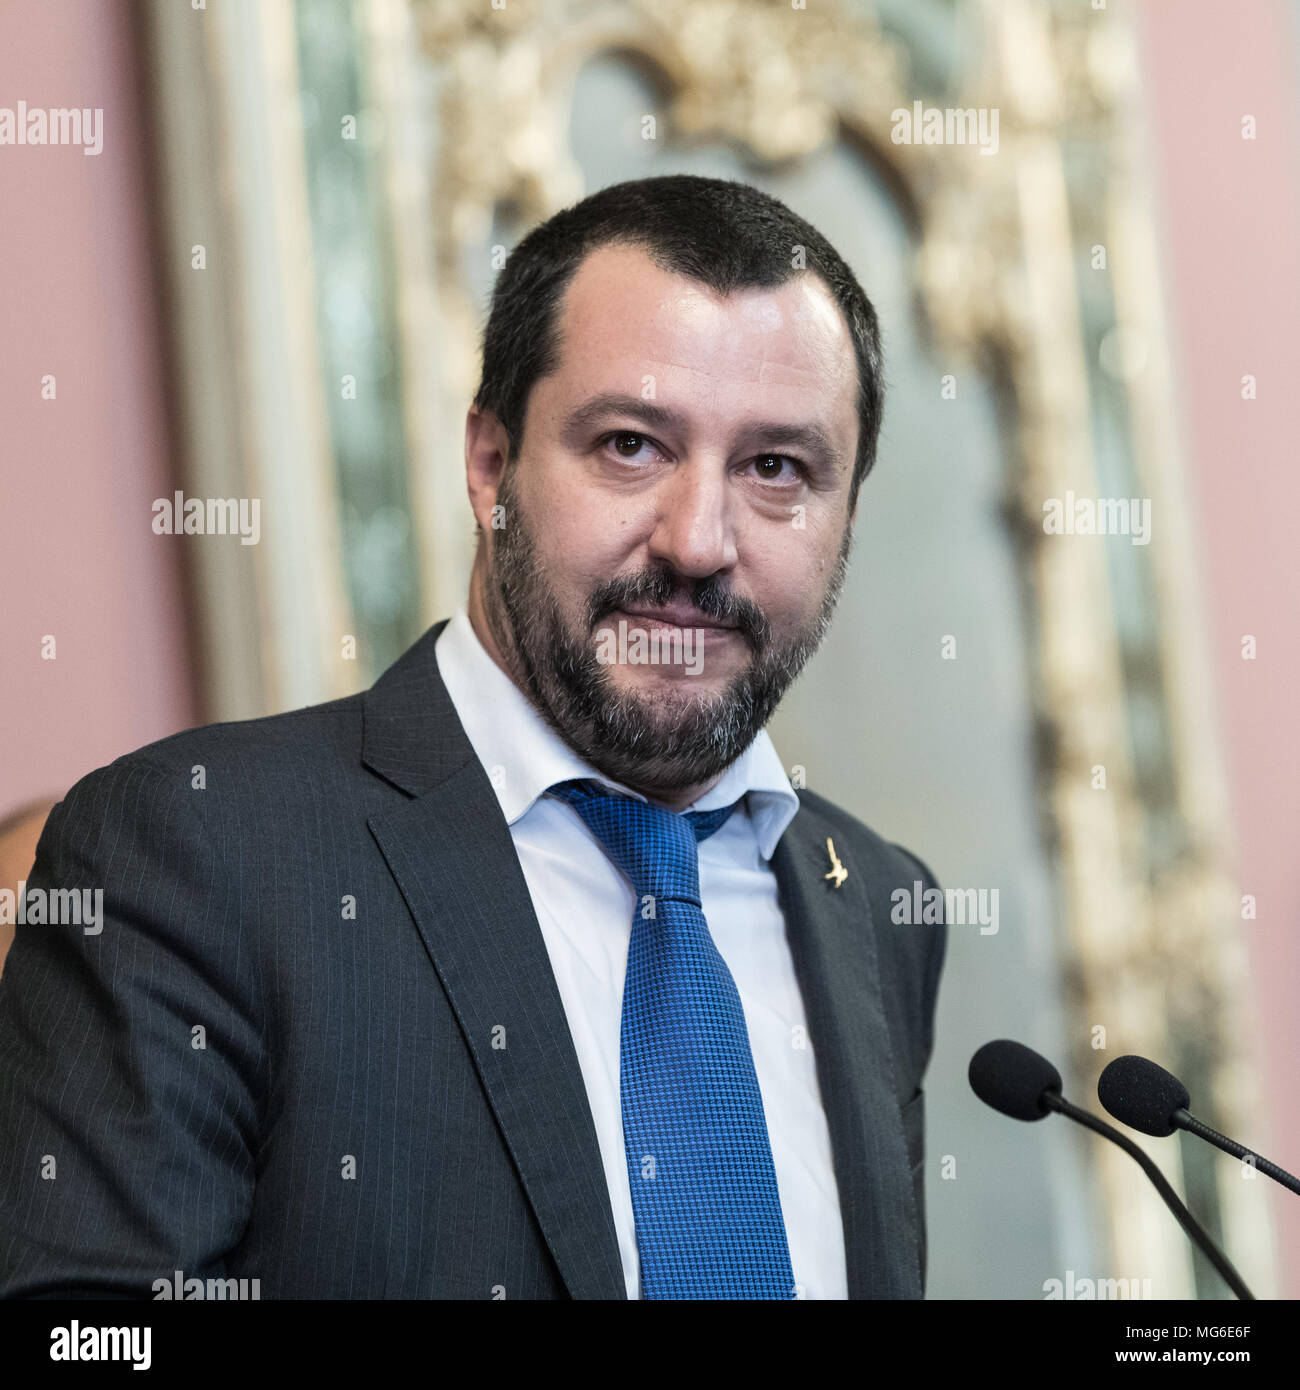 Matteo Salvini, leader of Lega Party, after the press conference in the Senate of the Italian Republic. Rome, Italy, 15th April 2018. Stock Photo